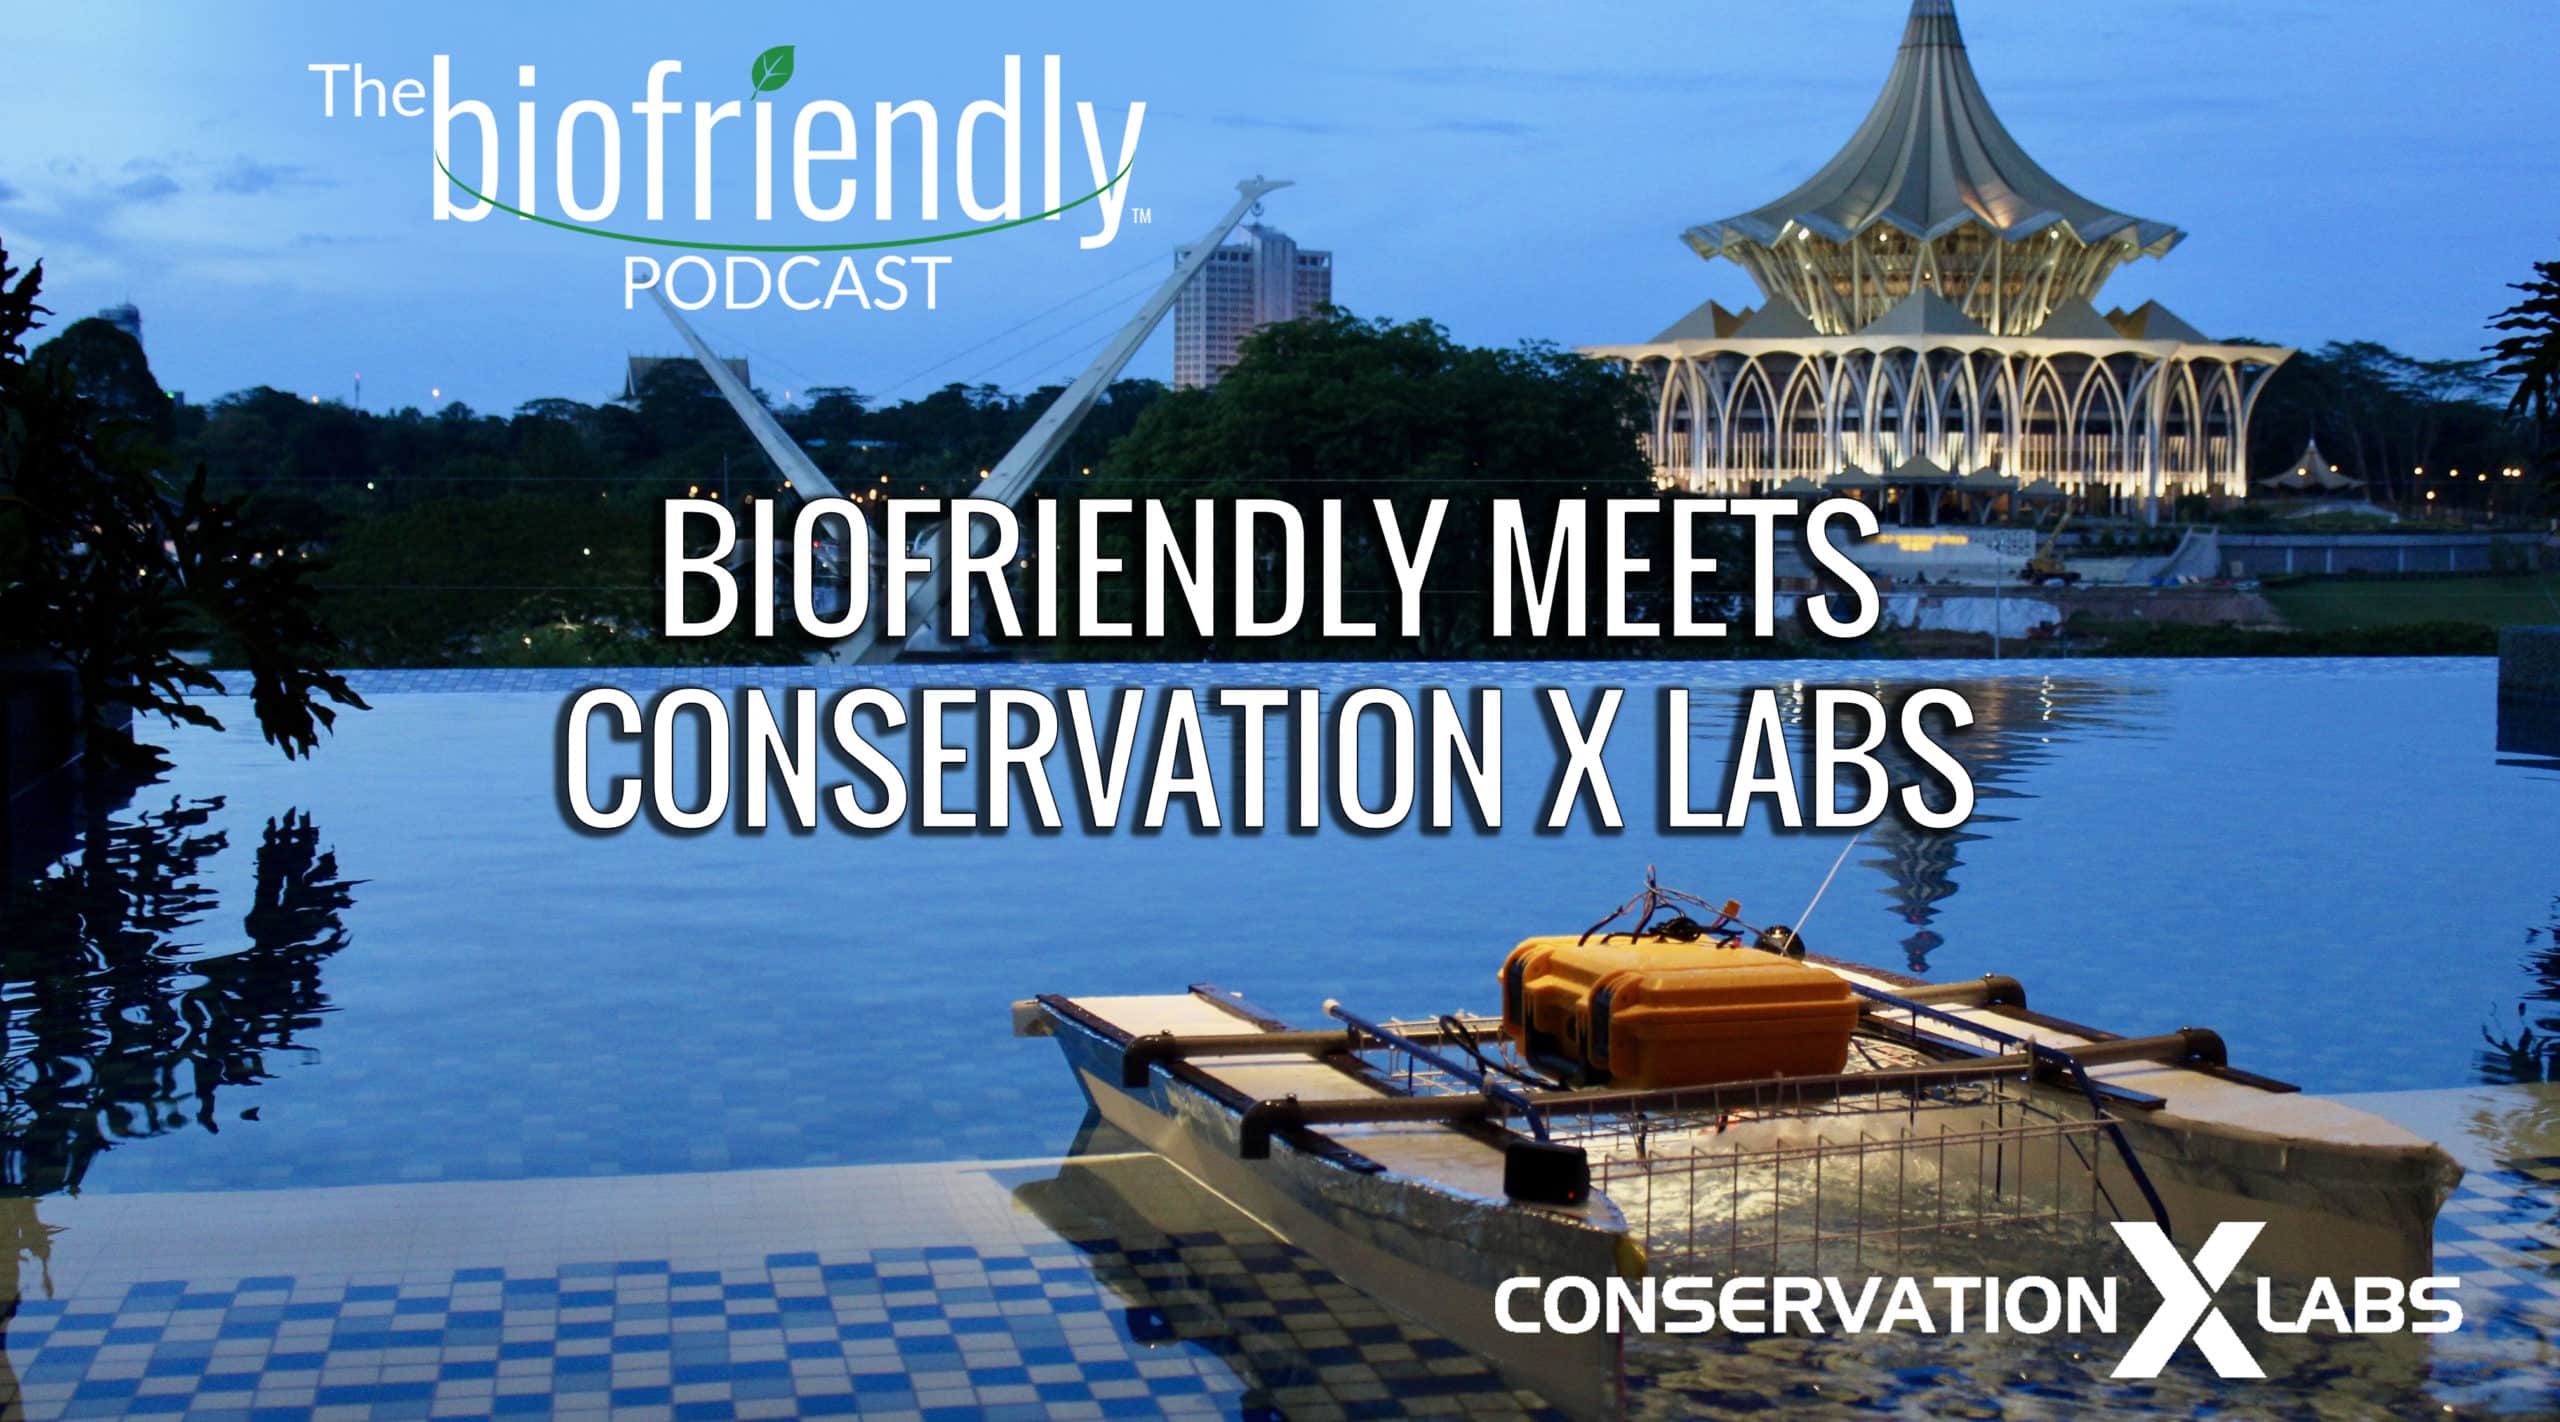 The Biofriendly Podcast - Episode 62 - Biofriendly Meets Conservation X Labs